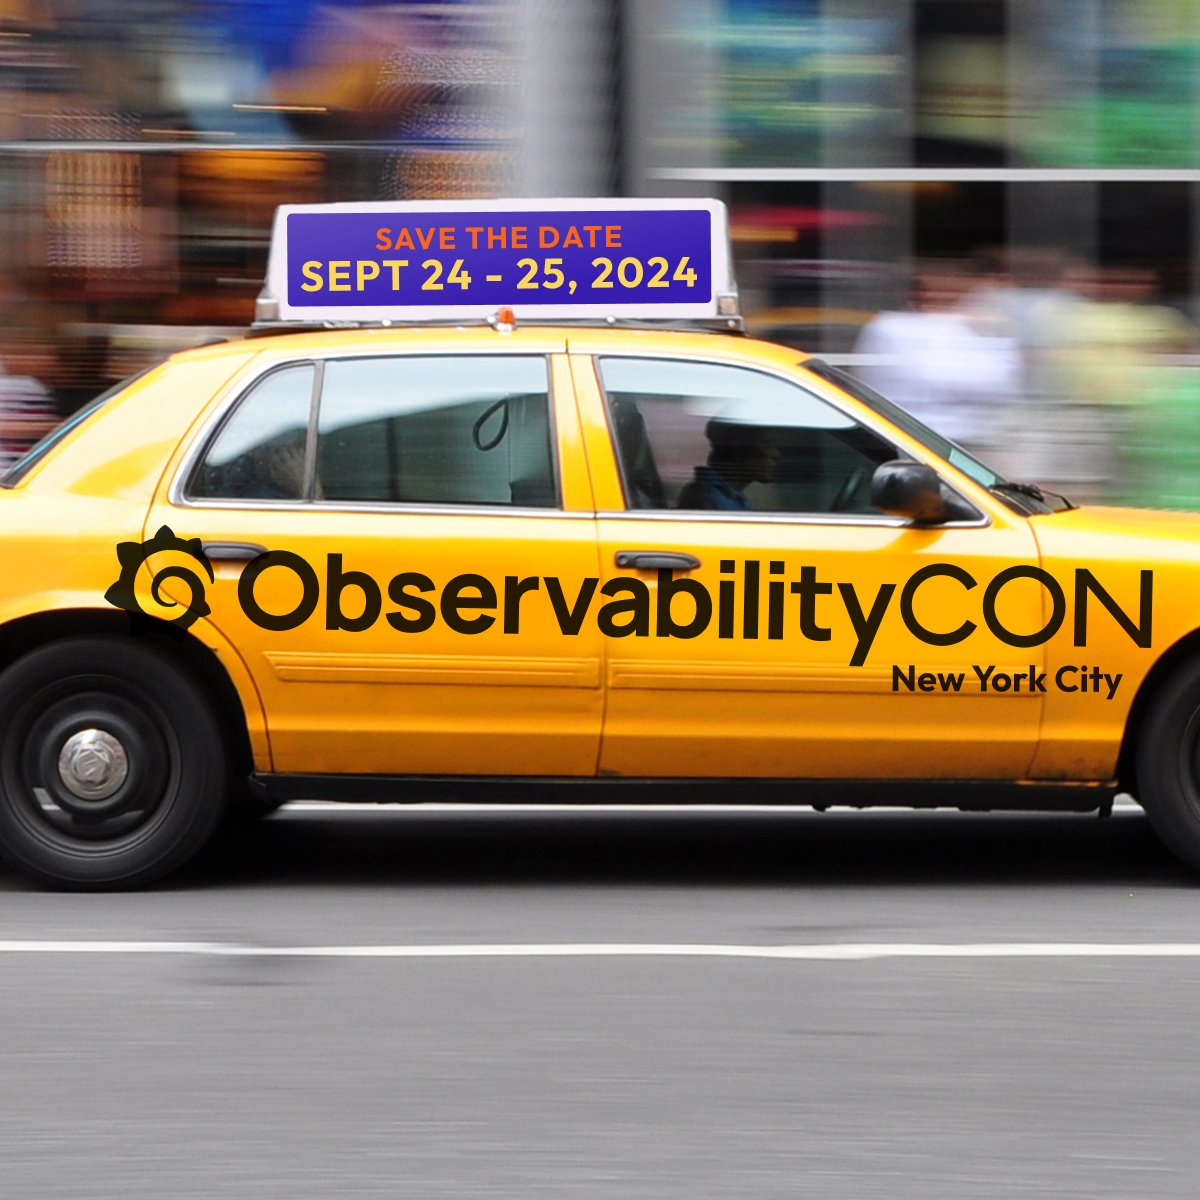 🚕 Save the date for #ObservabilityCON 2024 NYC!

It's time to accelerate your #observability roadmap, and all signs point to ObservabilityCON. The photos say it all.

Sign up to be notified when early bird tickets go live: bit.ly/3QIiKV6